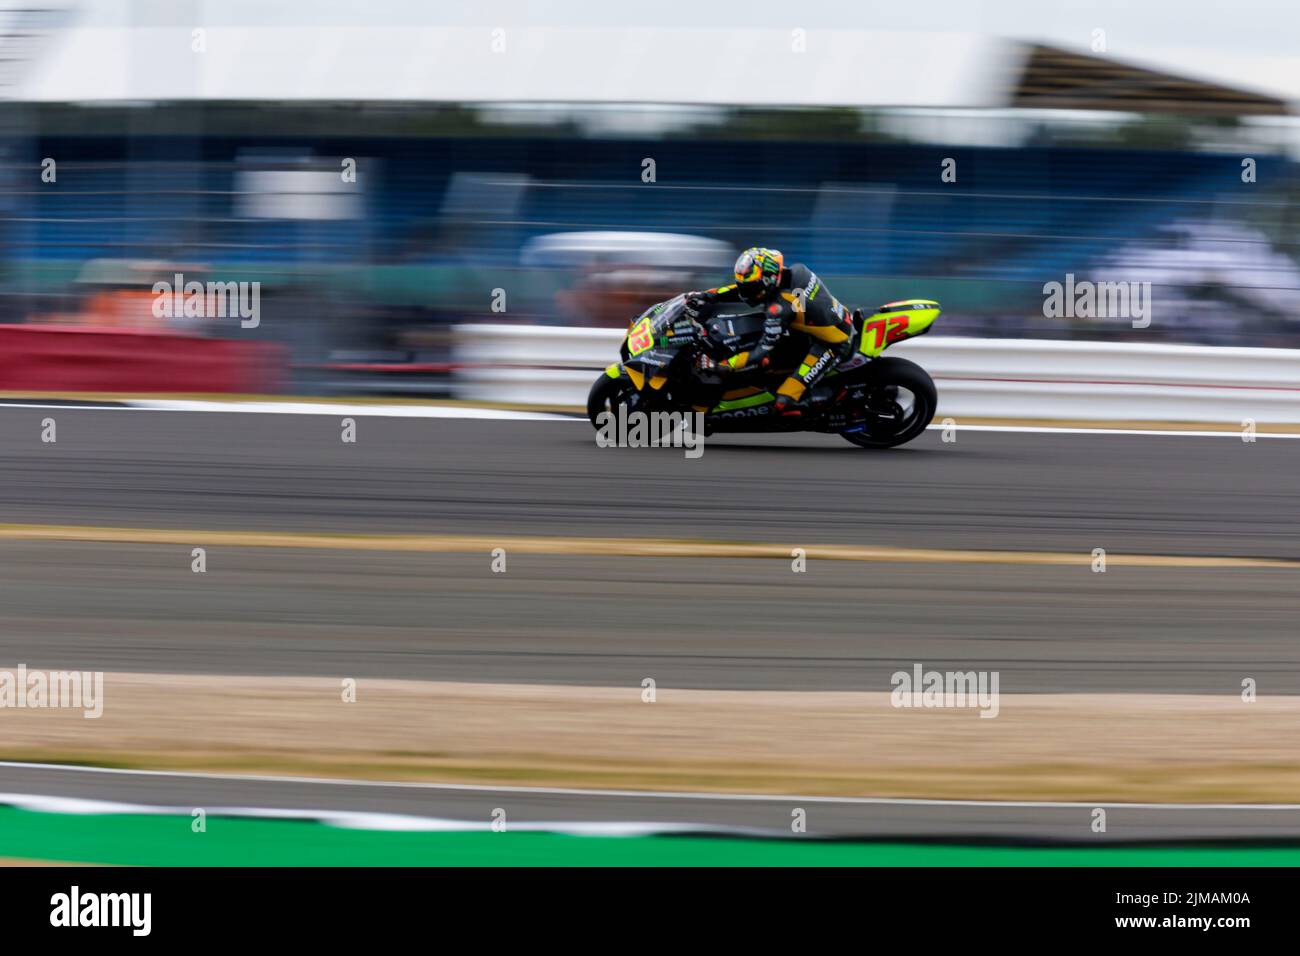 Silverstone, UK. 5th August 2022; Silverstone Circuit, Silverstone, Northamptonshire, England: British MotoGP Grand Prix, Free Practice: Number 72 Mooney VR46 Racing bike ridden by Marco Bezzecchi during free practice 2 at the British MotoGP Credit: Action Plus Sports Images/Alamy Live News Stock Photo